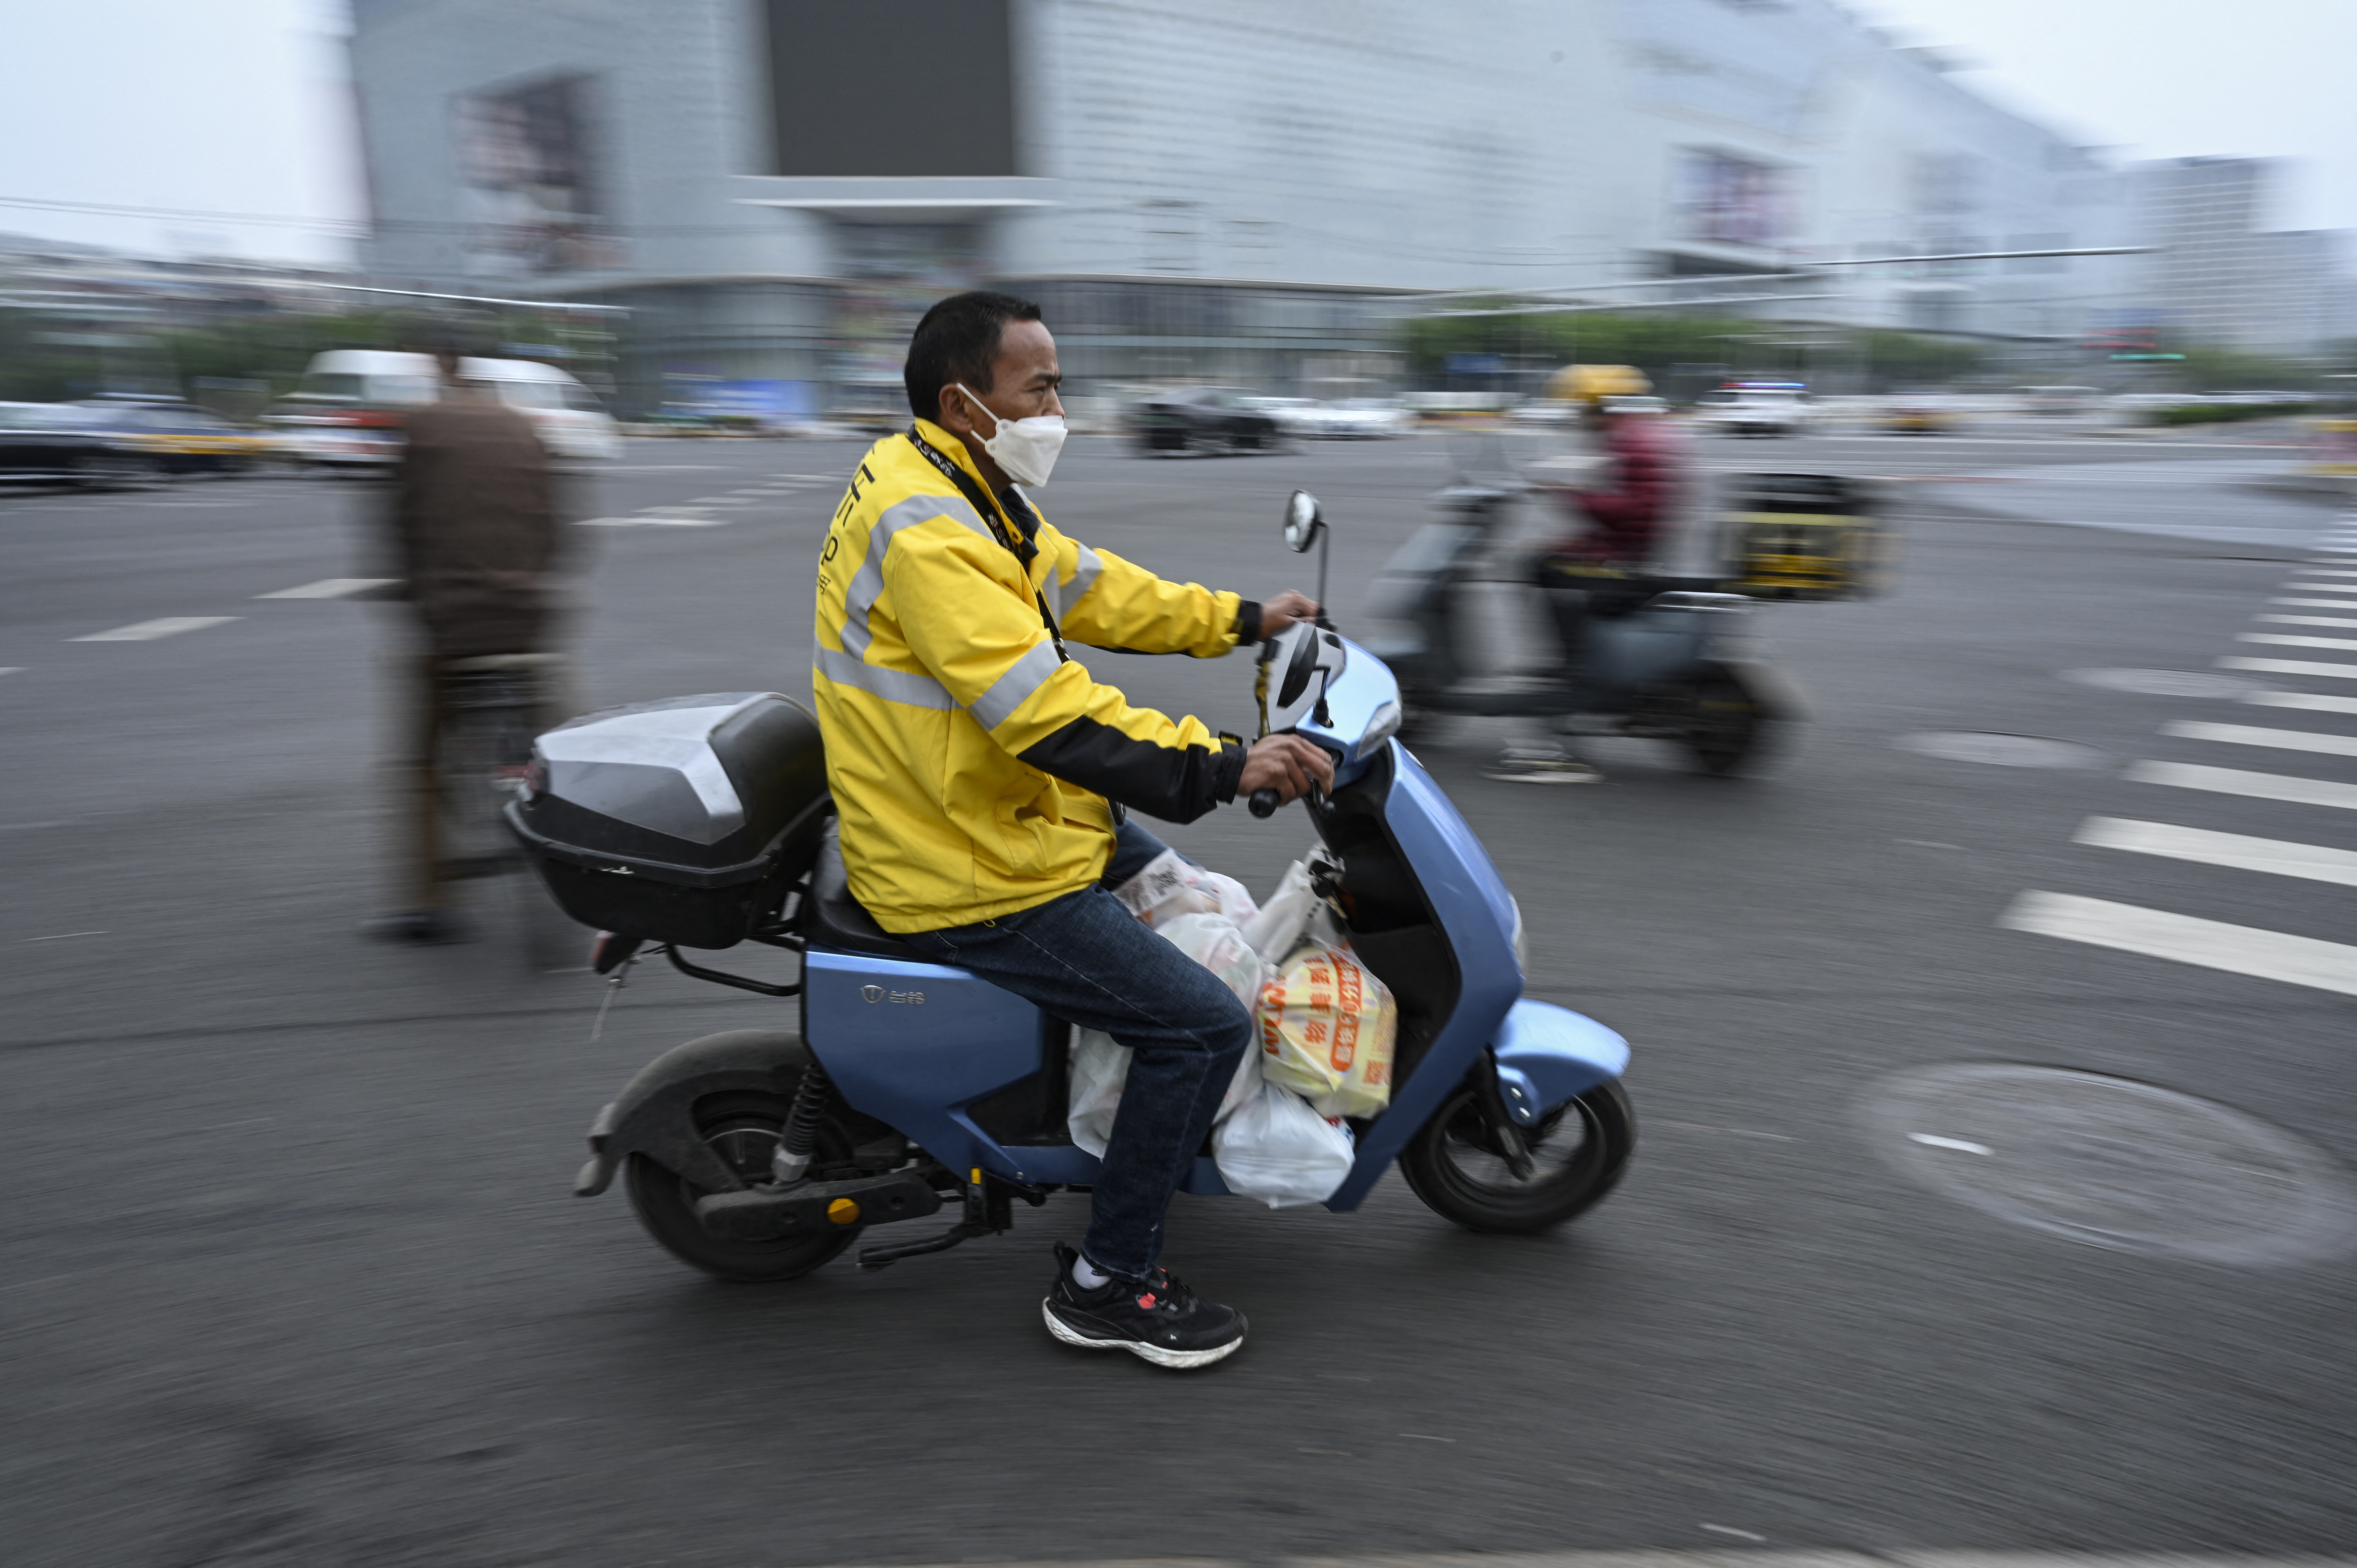 2020: The report that shed light on Chinese delivery drivers’ appalling working conditions